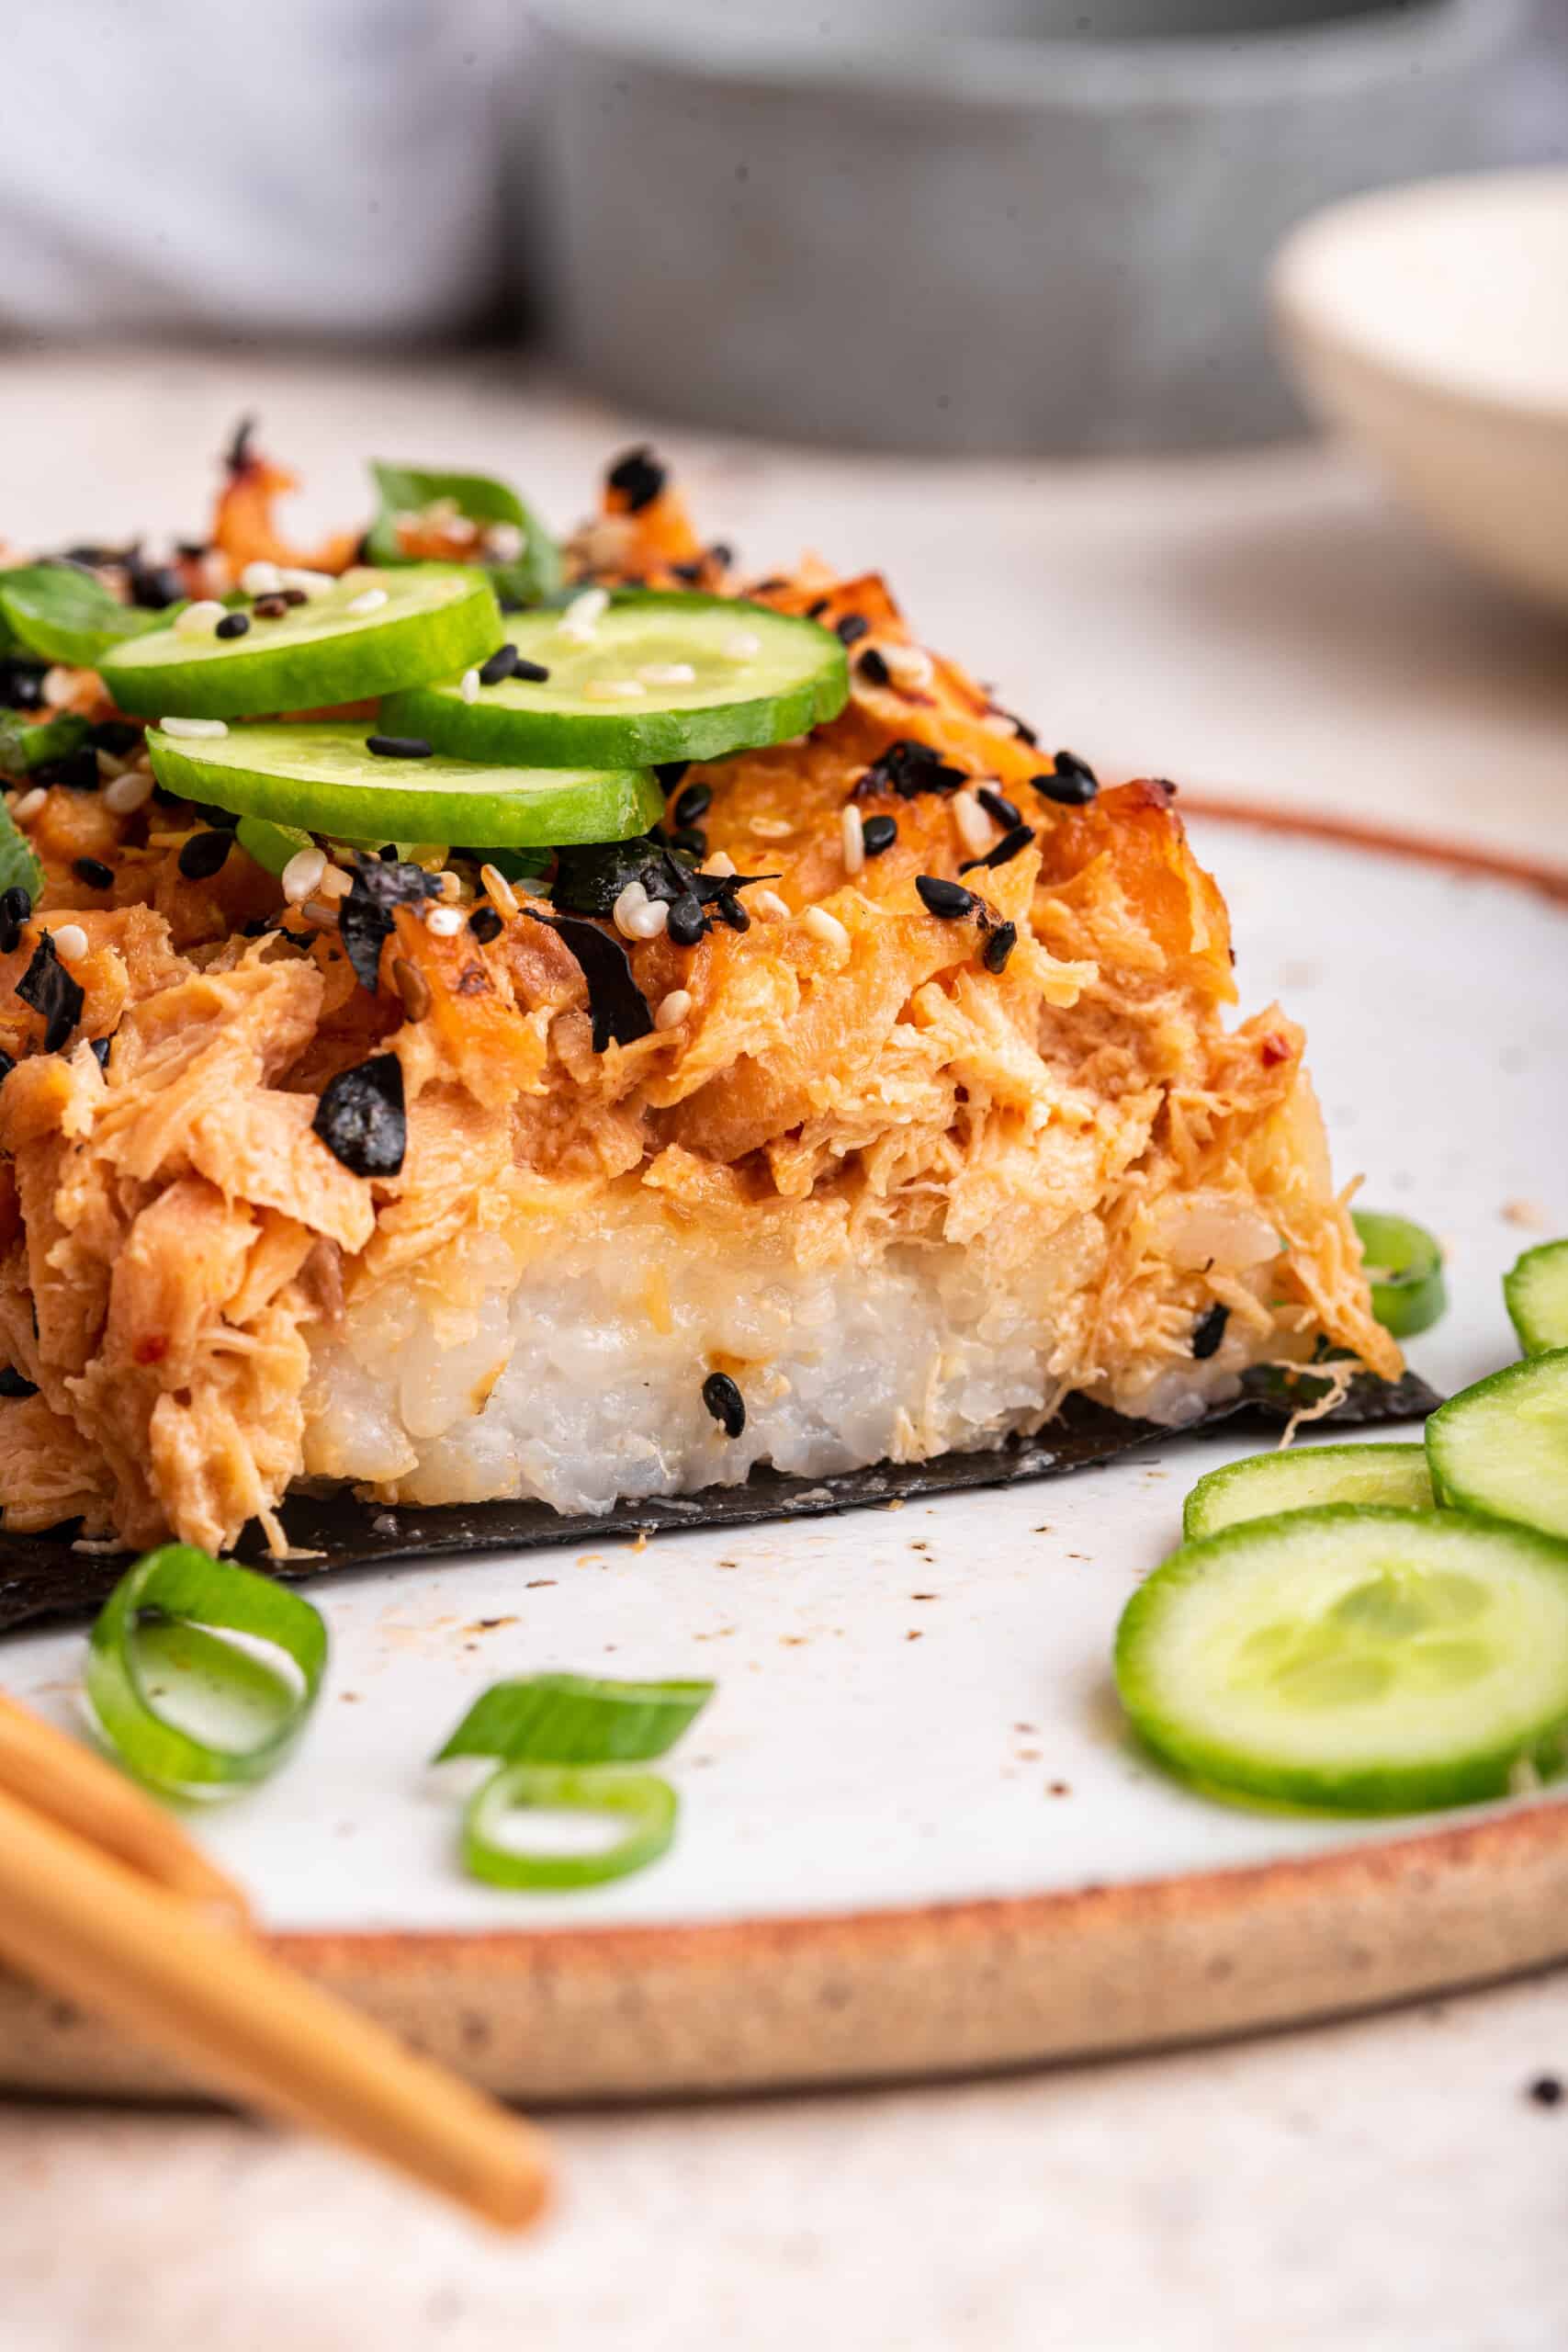 Salmon sushi bake on plate with sliced cucumbers and green onions